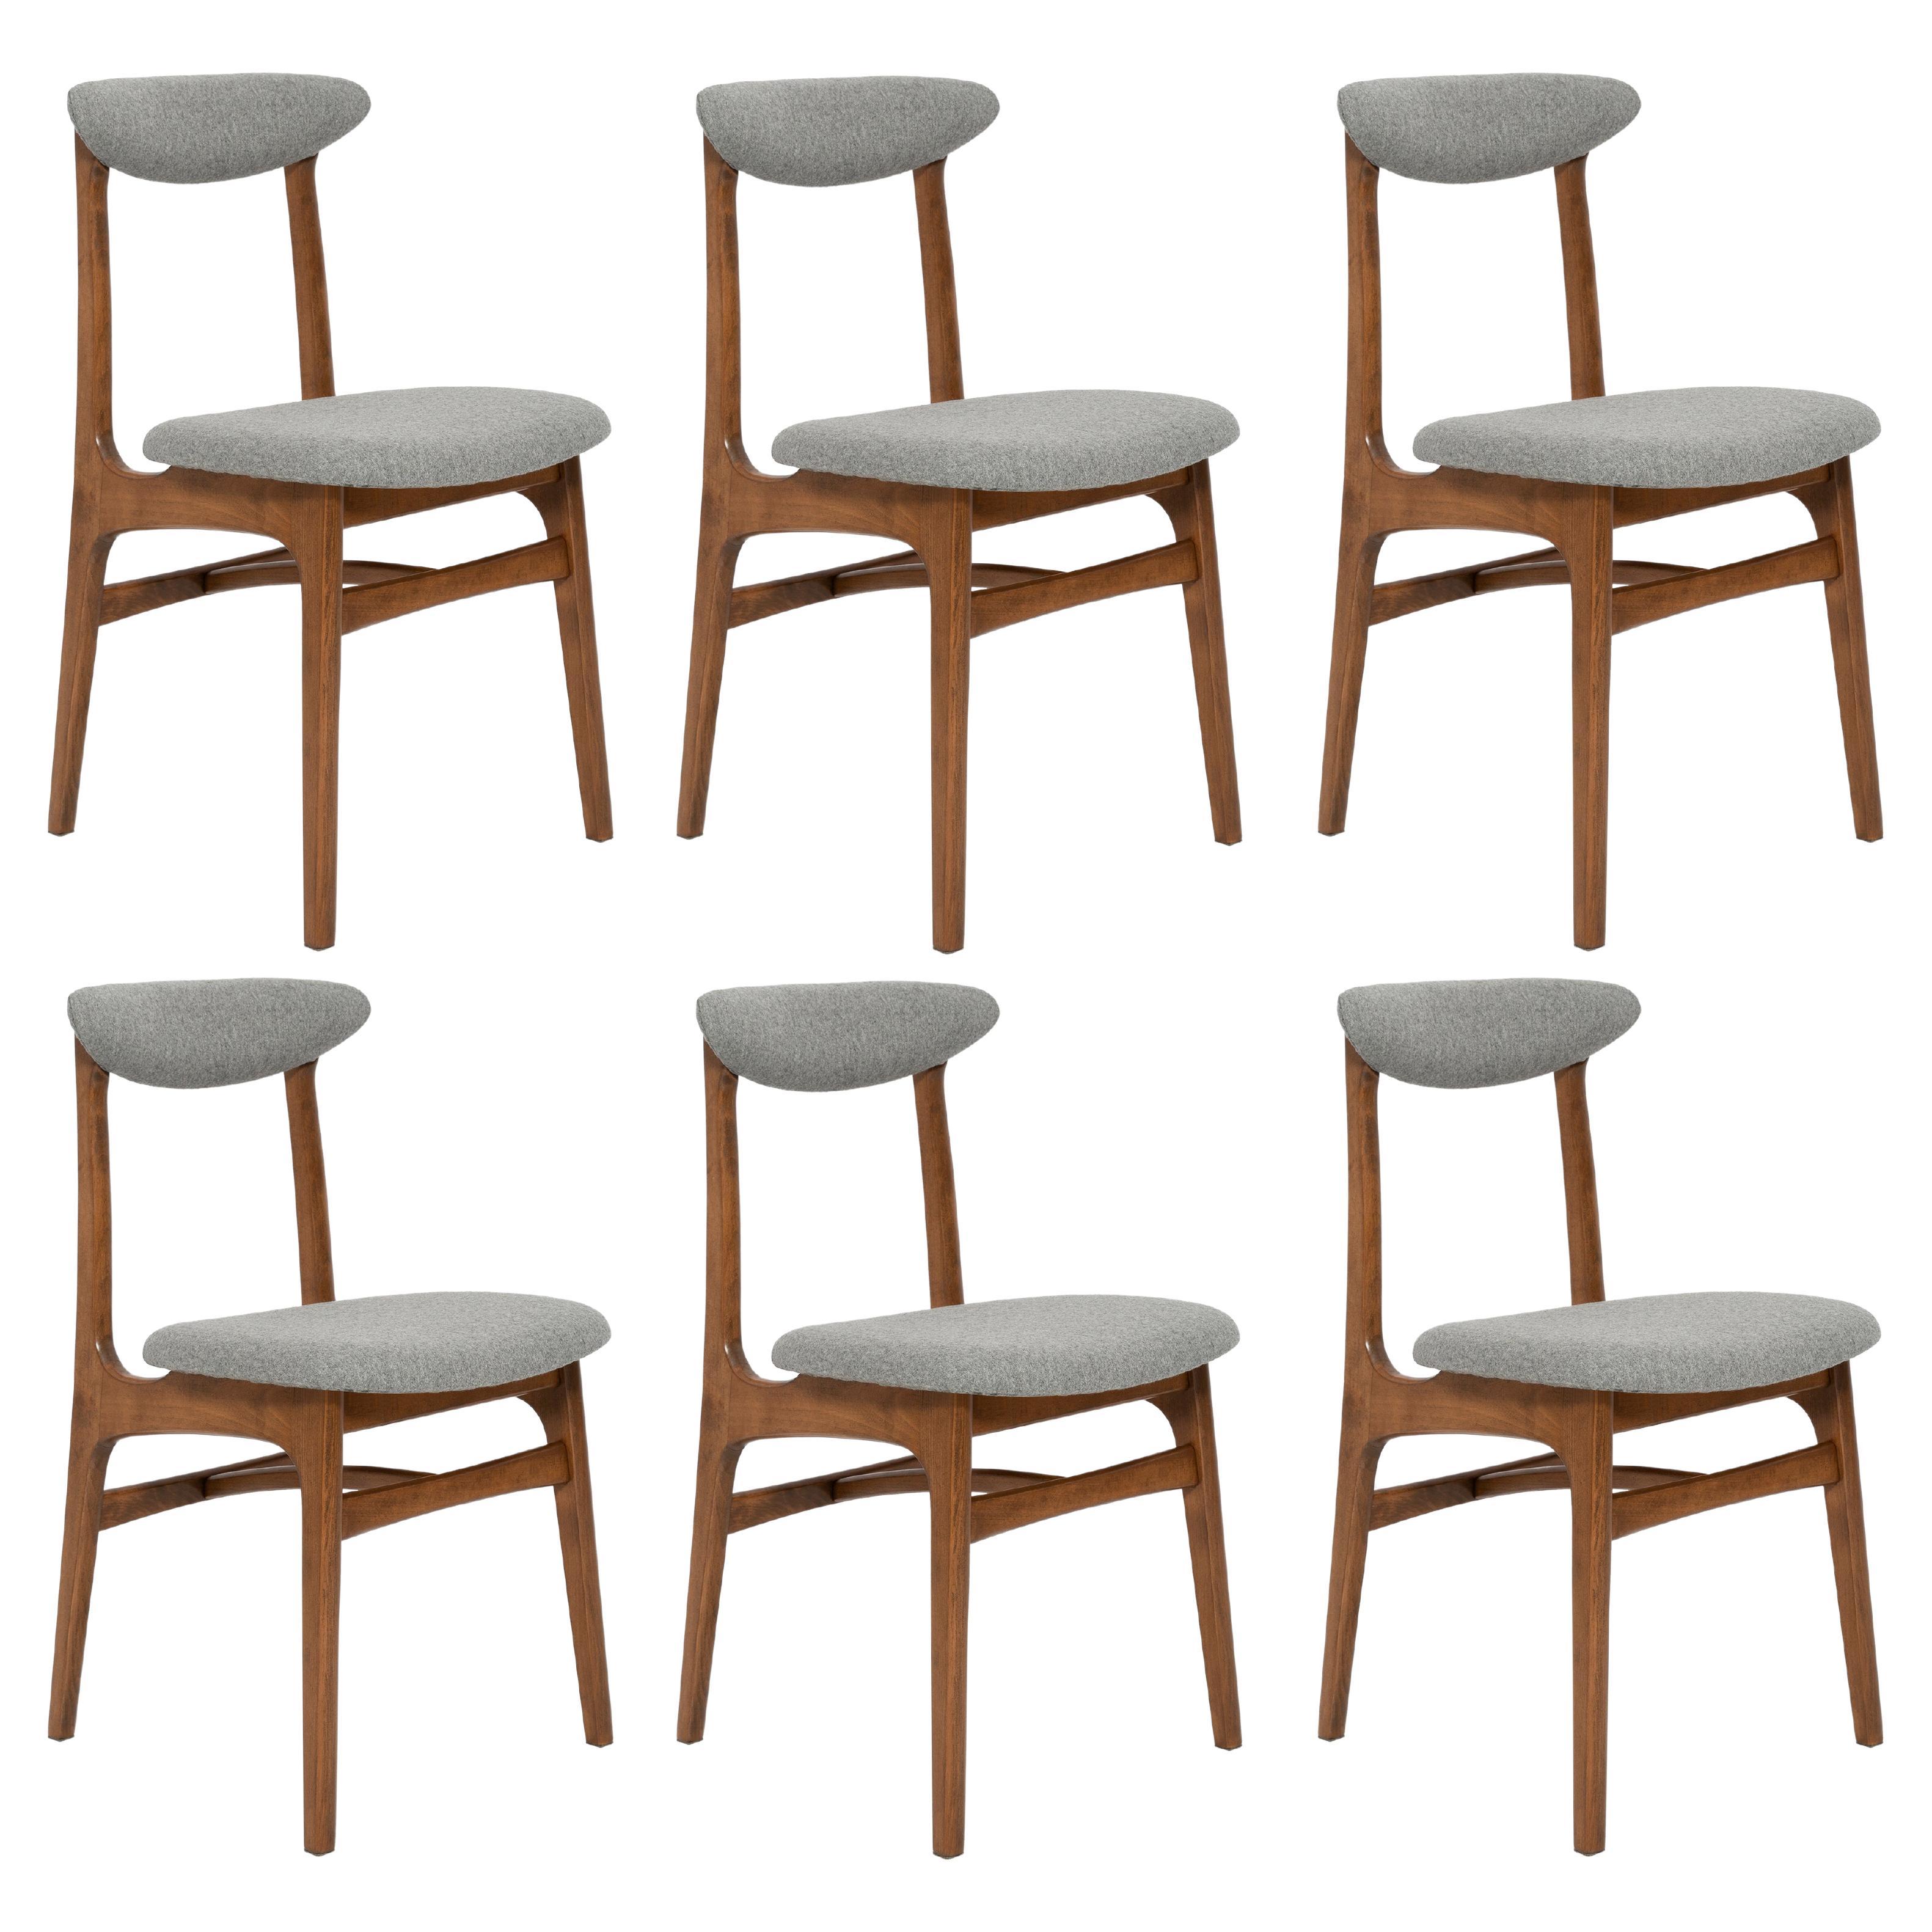 Set of Six Mid Century Gray Wool Chairs by Rajmund Halas, Poland, 1960s For Sale